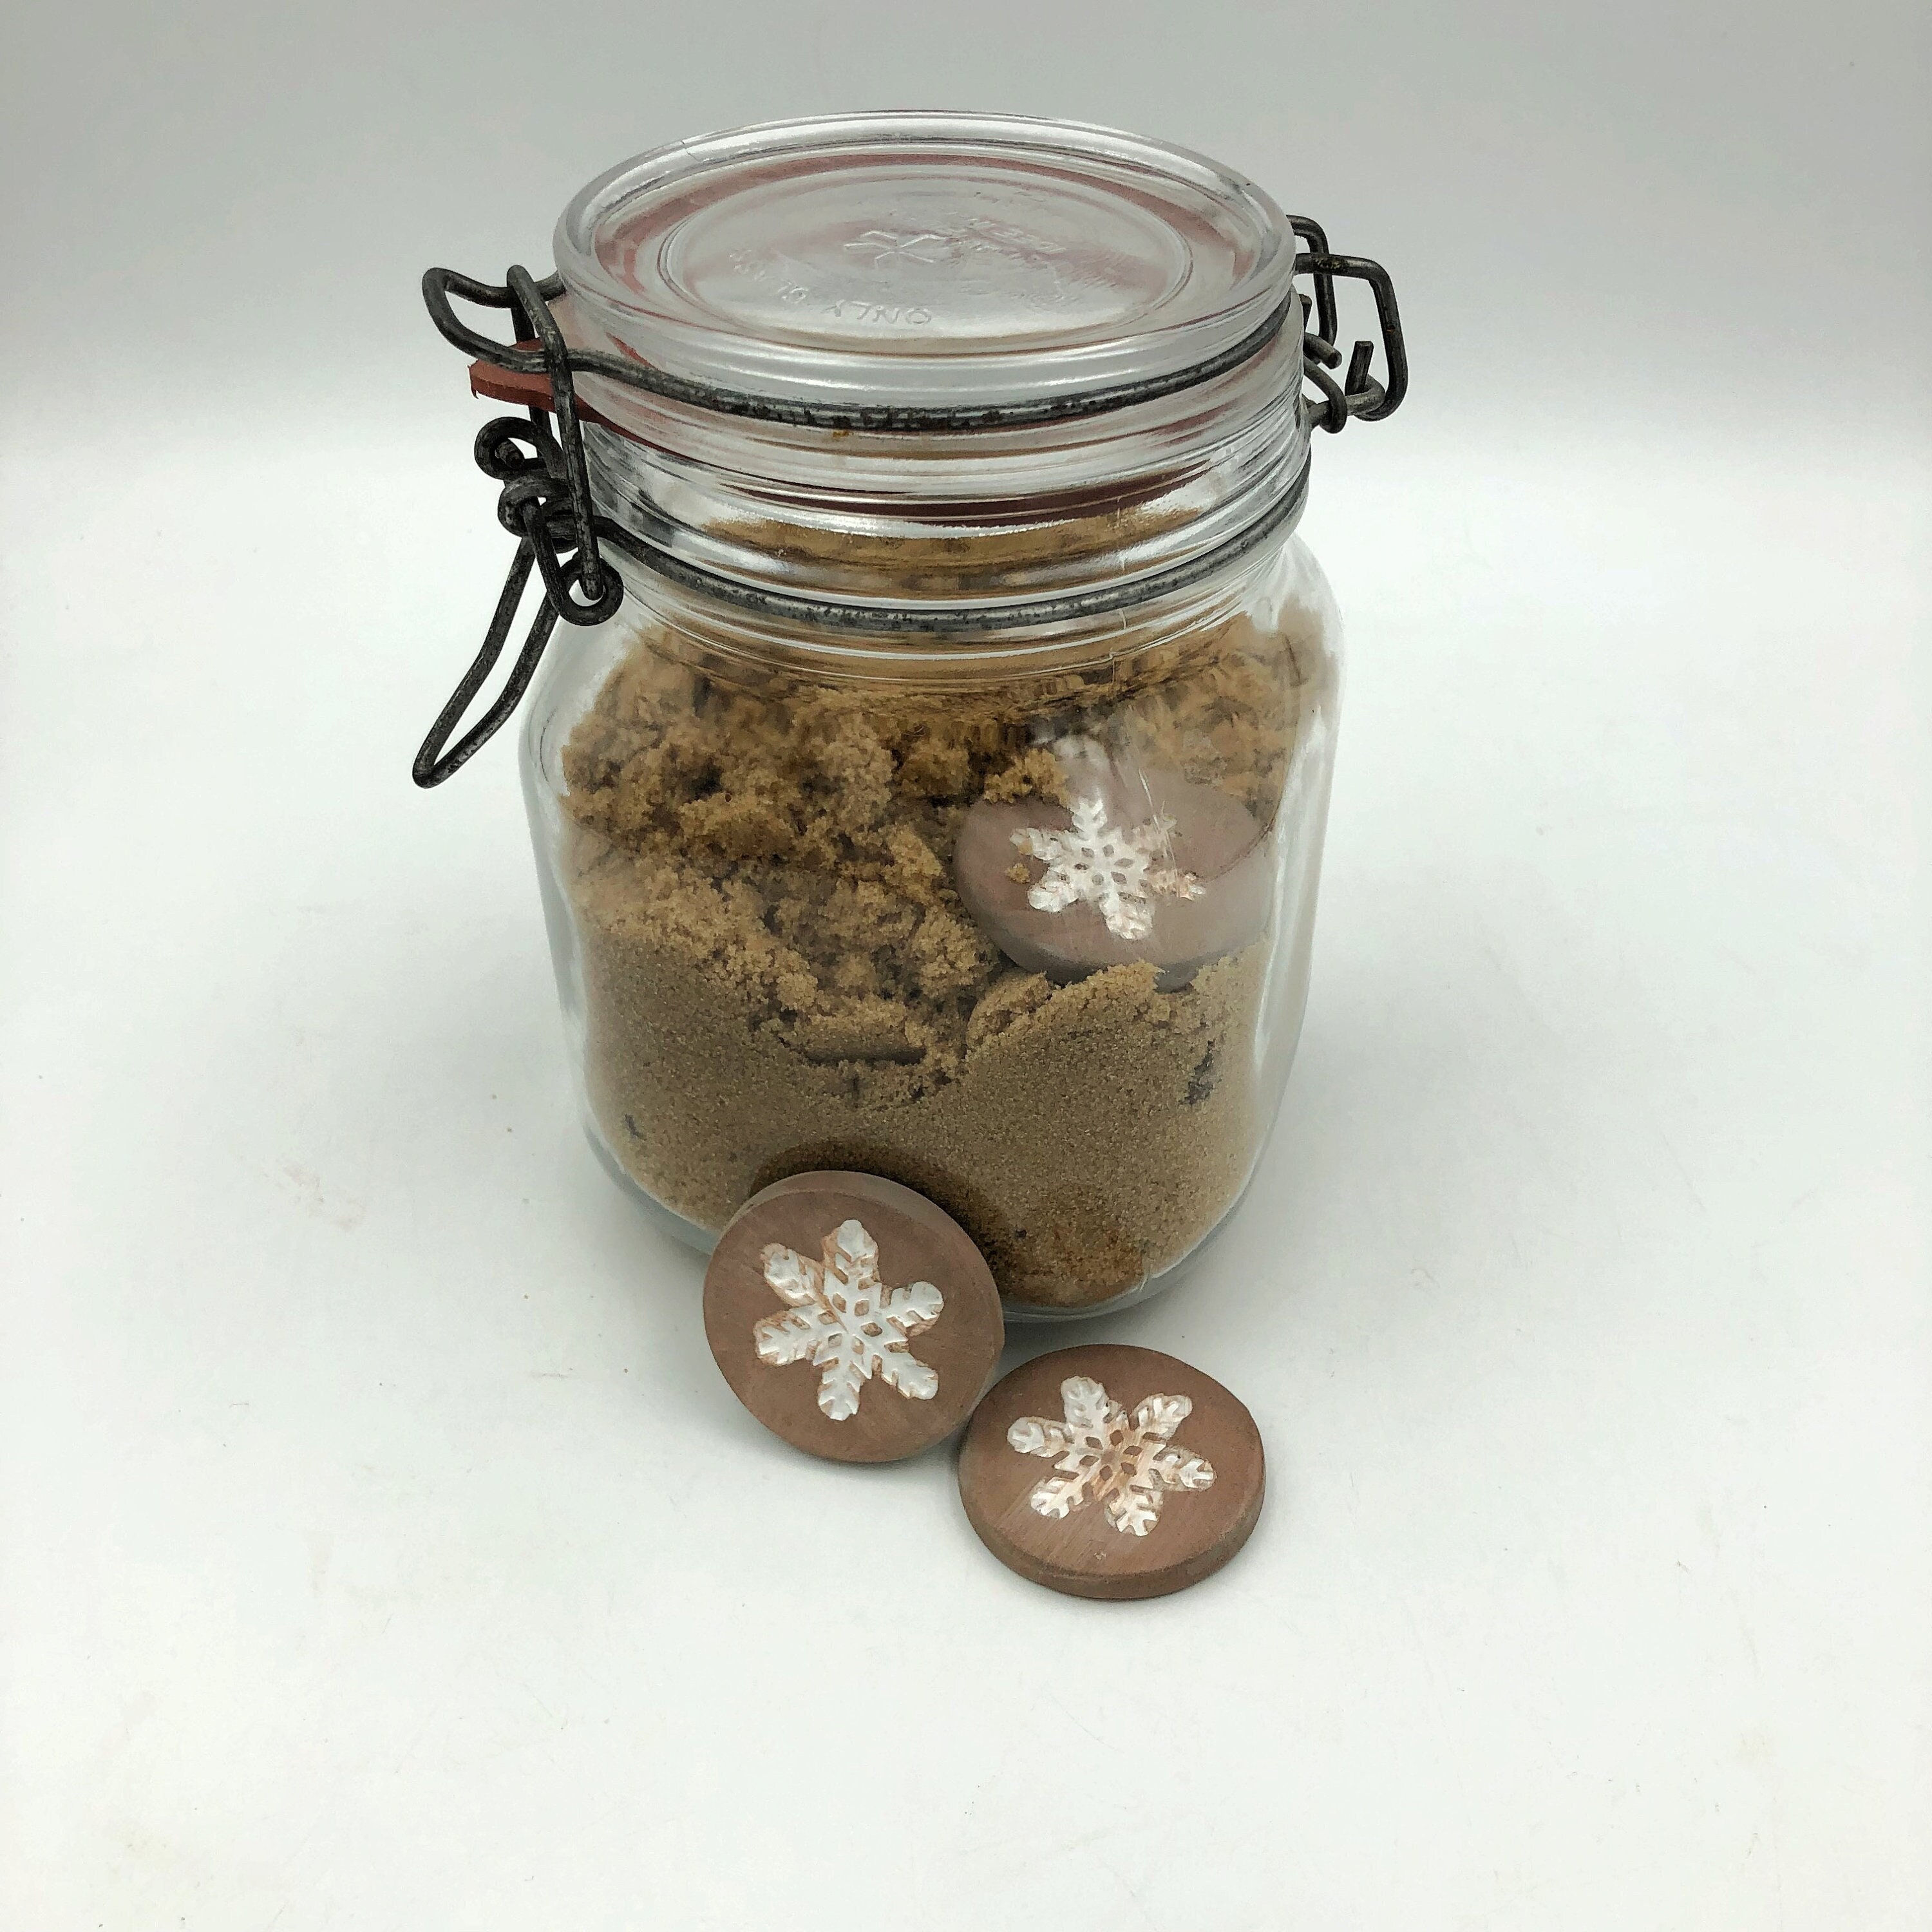 Brown Sugar Keeper Keeps Your Sugar Soft and Easy to Scoop Keeps Dried  Fruit Soft Also Nice for Aromatherapy With Essential Oils 